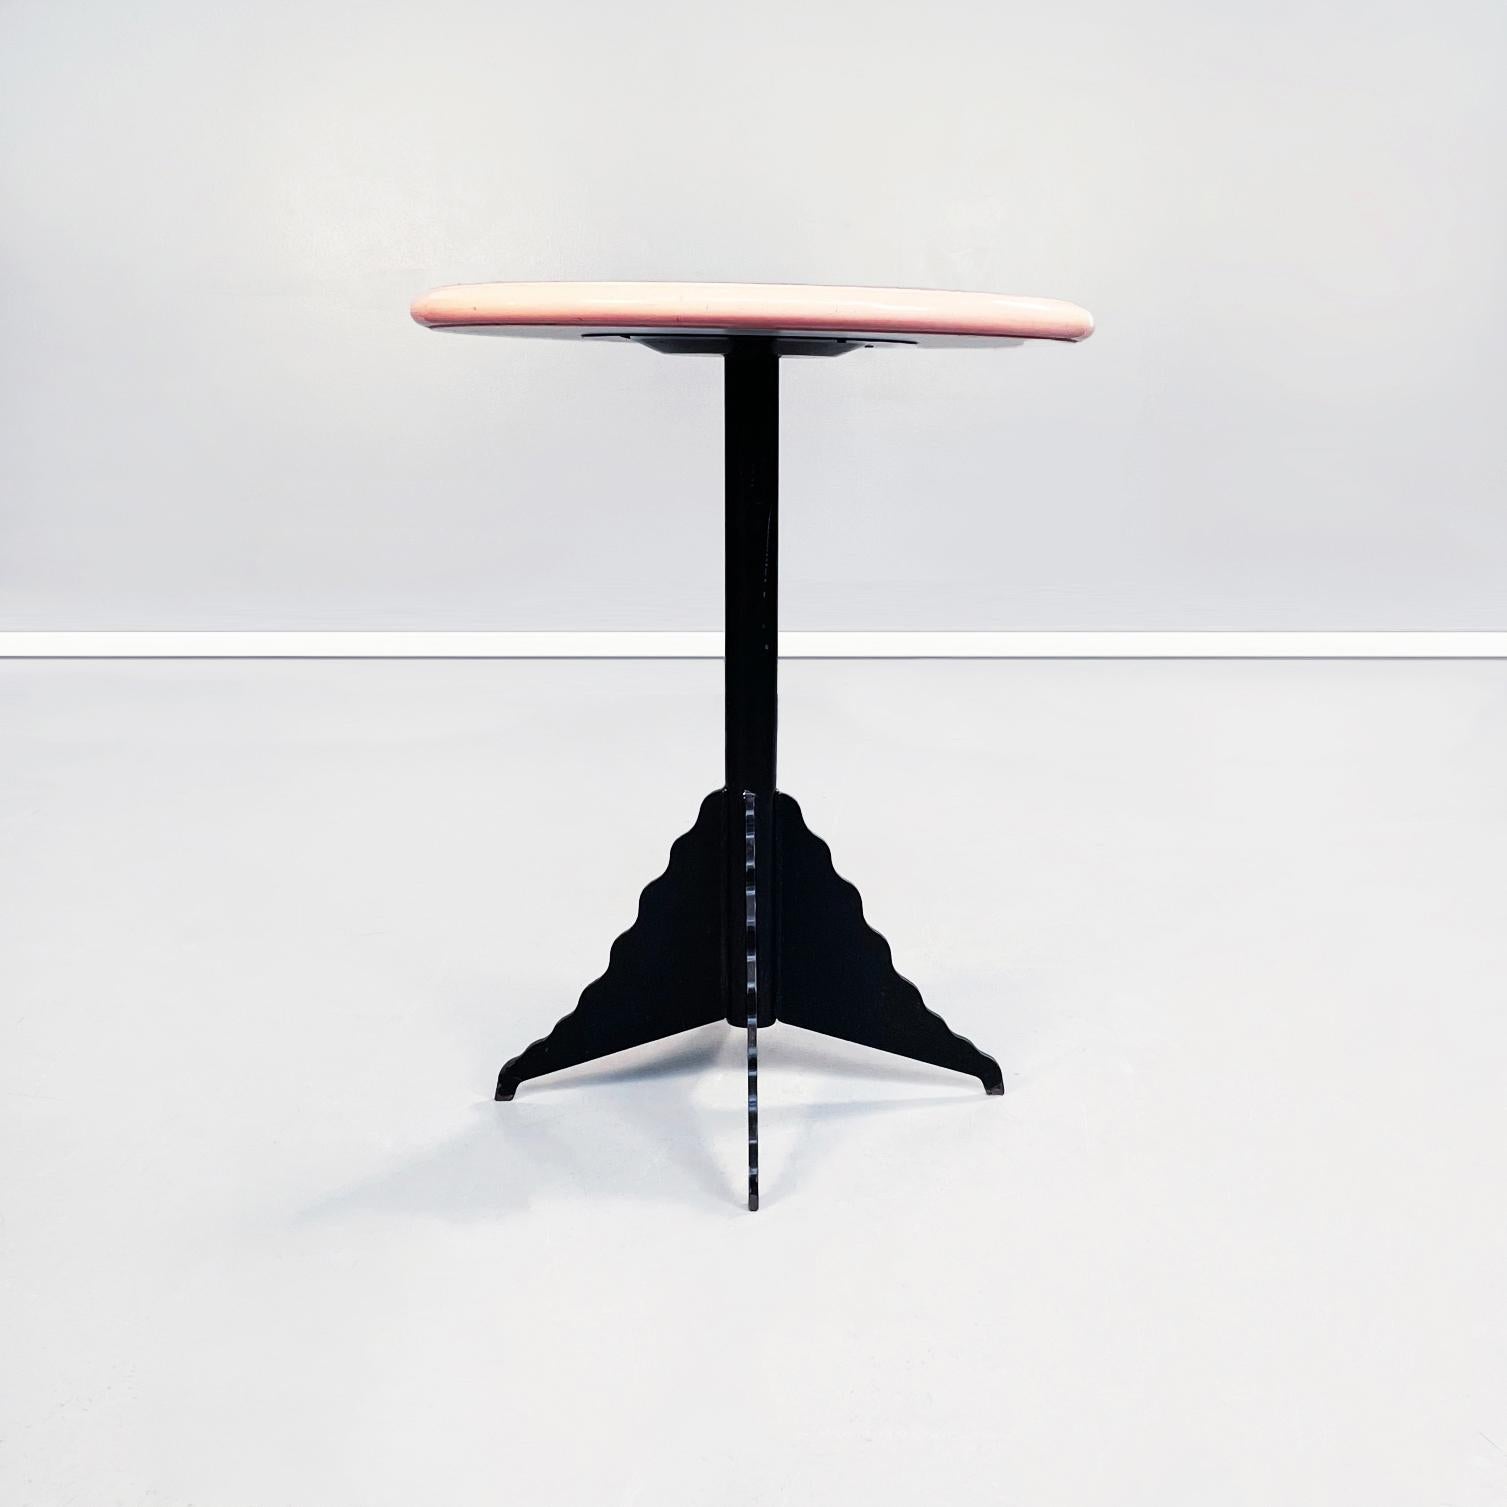 Italian mid-century Round coffee tables in white, grey and pink laminate and metal, 1980s
Set of three round coffee tables. The laminate top has a grey and white pattern in the center, while the perimeter is painted in bright pink. The central